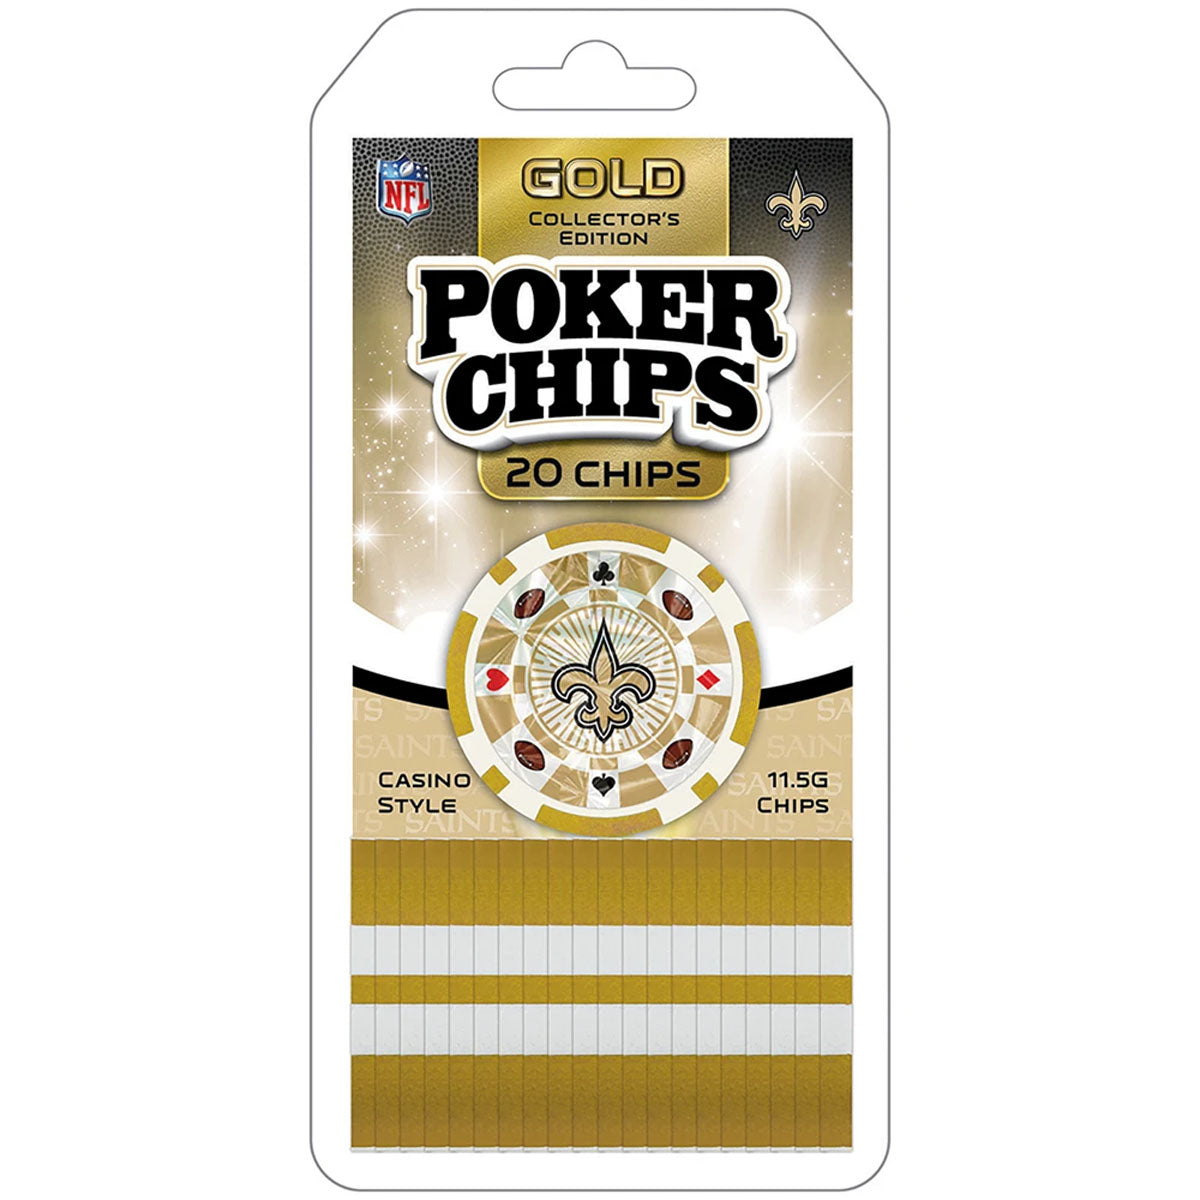 New Orleans Saints Special Edition Gold Poker Chips, 20 Chips